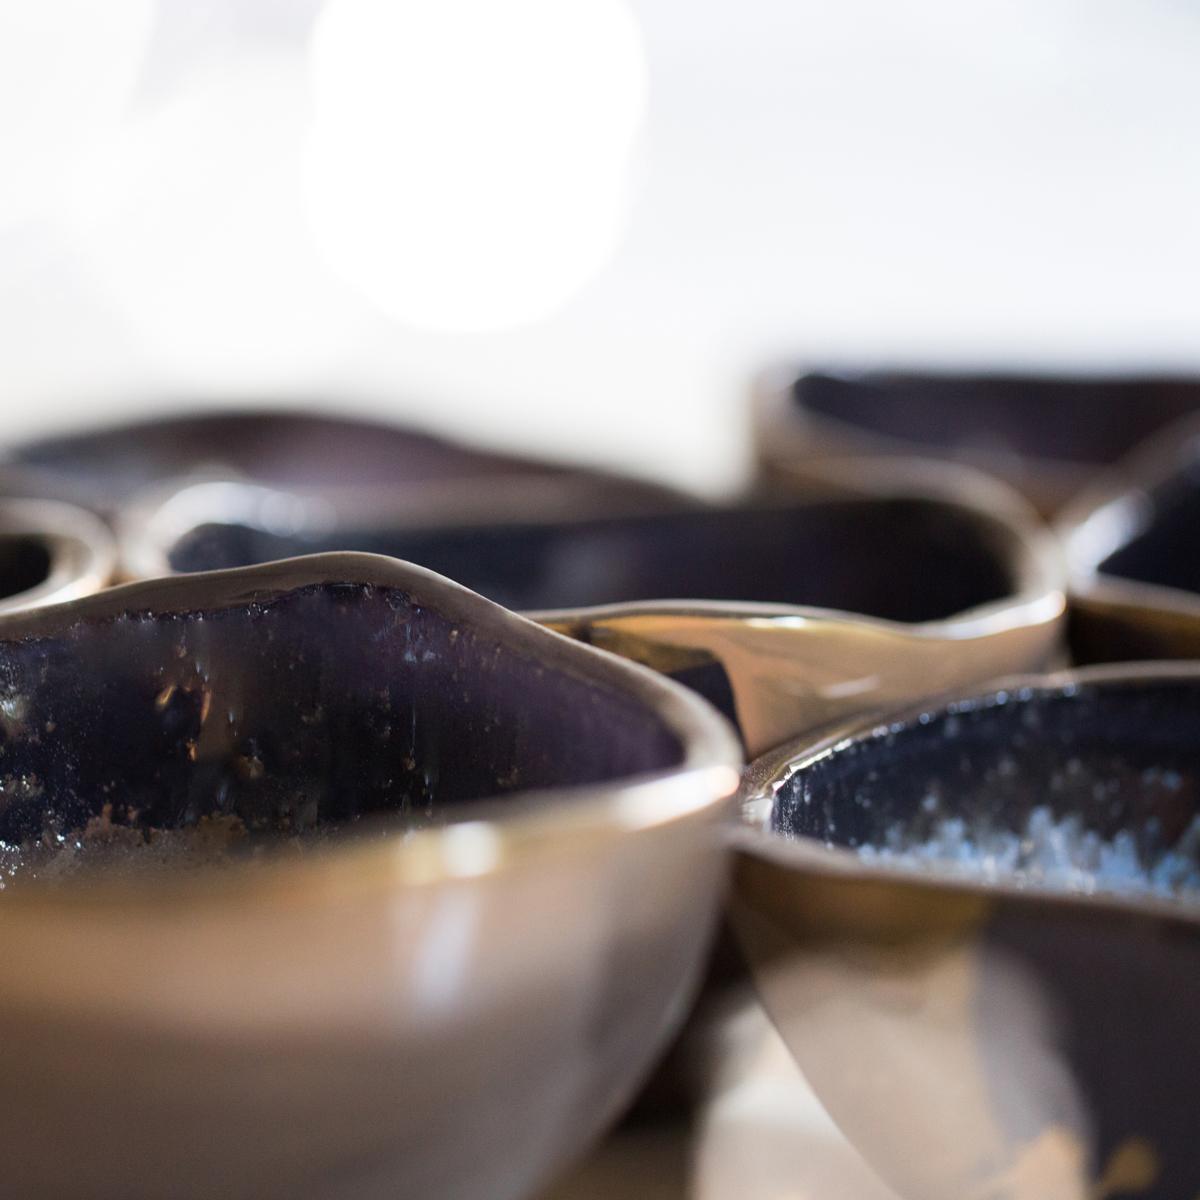 Handcrafted Japanese rice bowls Reese in navy blue and gold by AnnaVasily's tableware designer Anna.